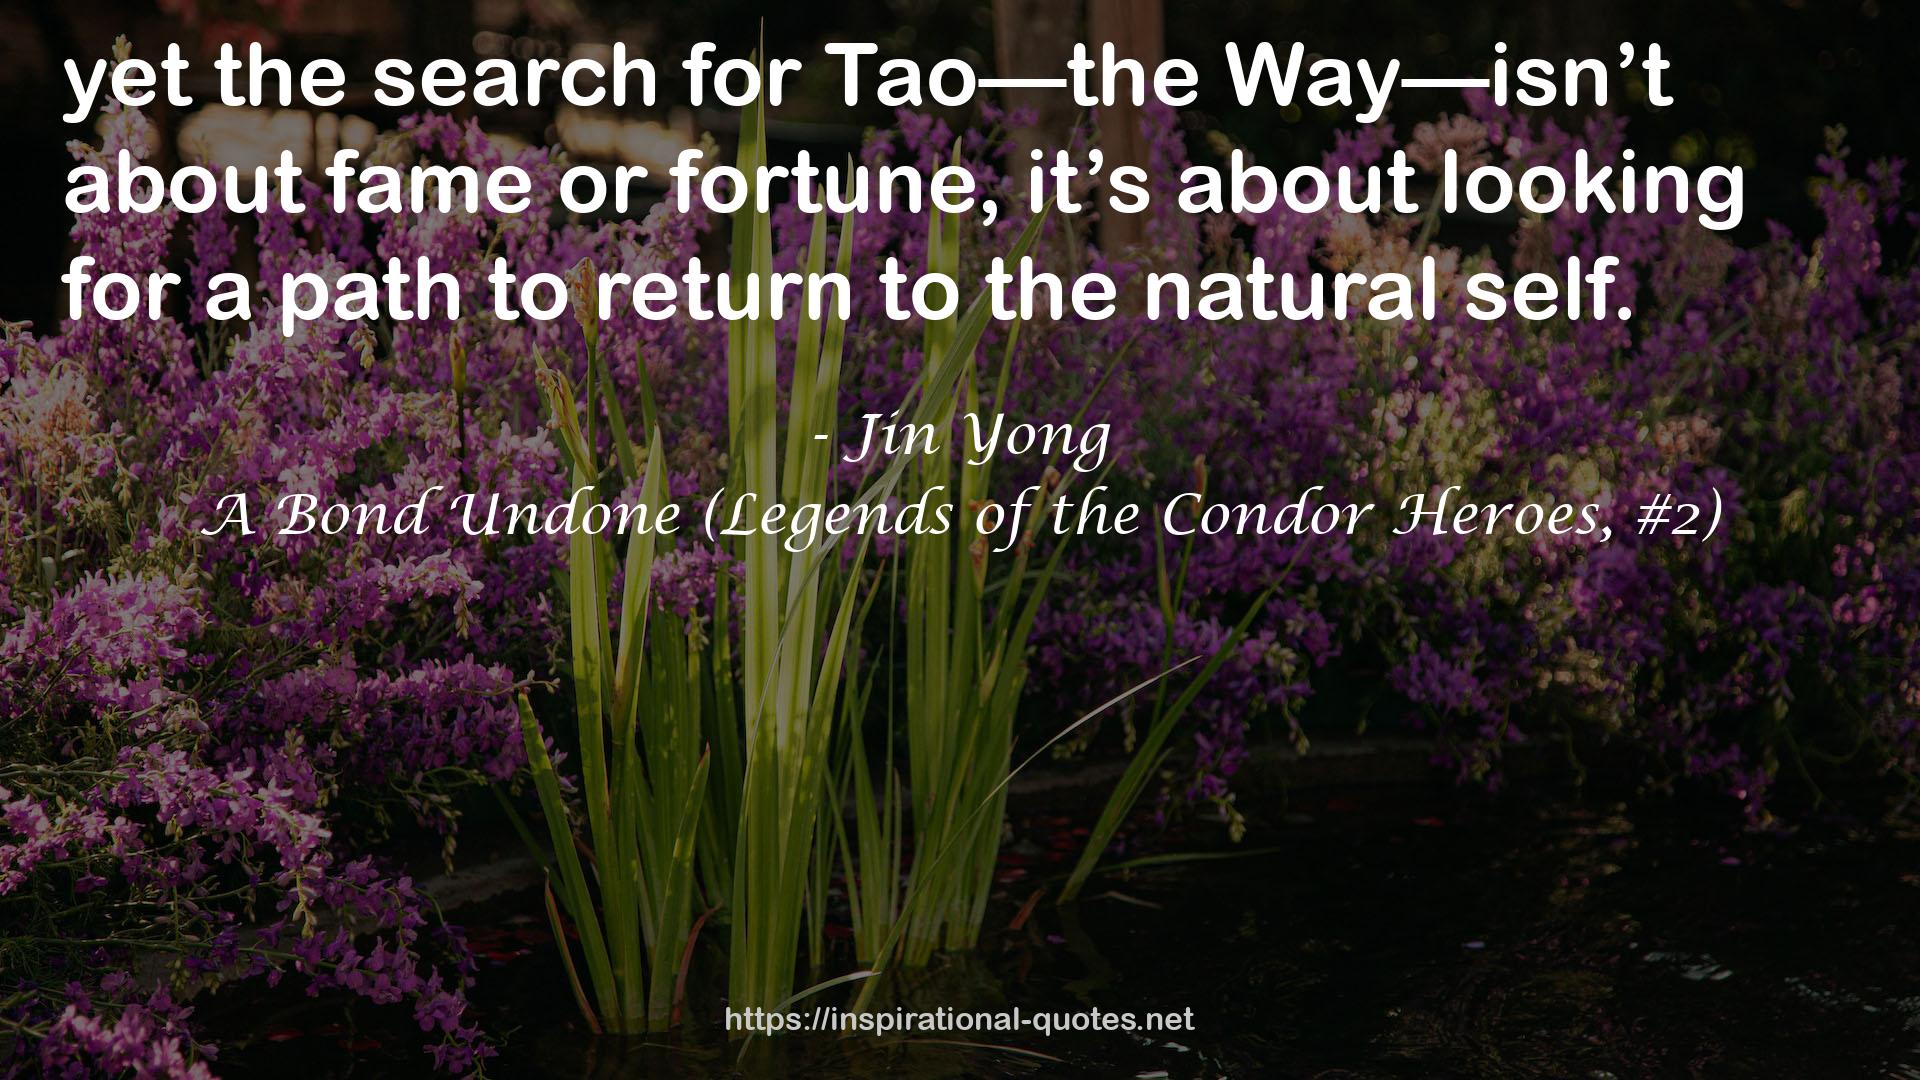 A Bond Undone (Legends of the Condor Heroes, #2) QUOTES